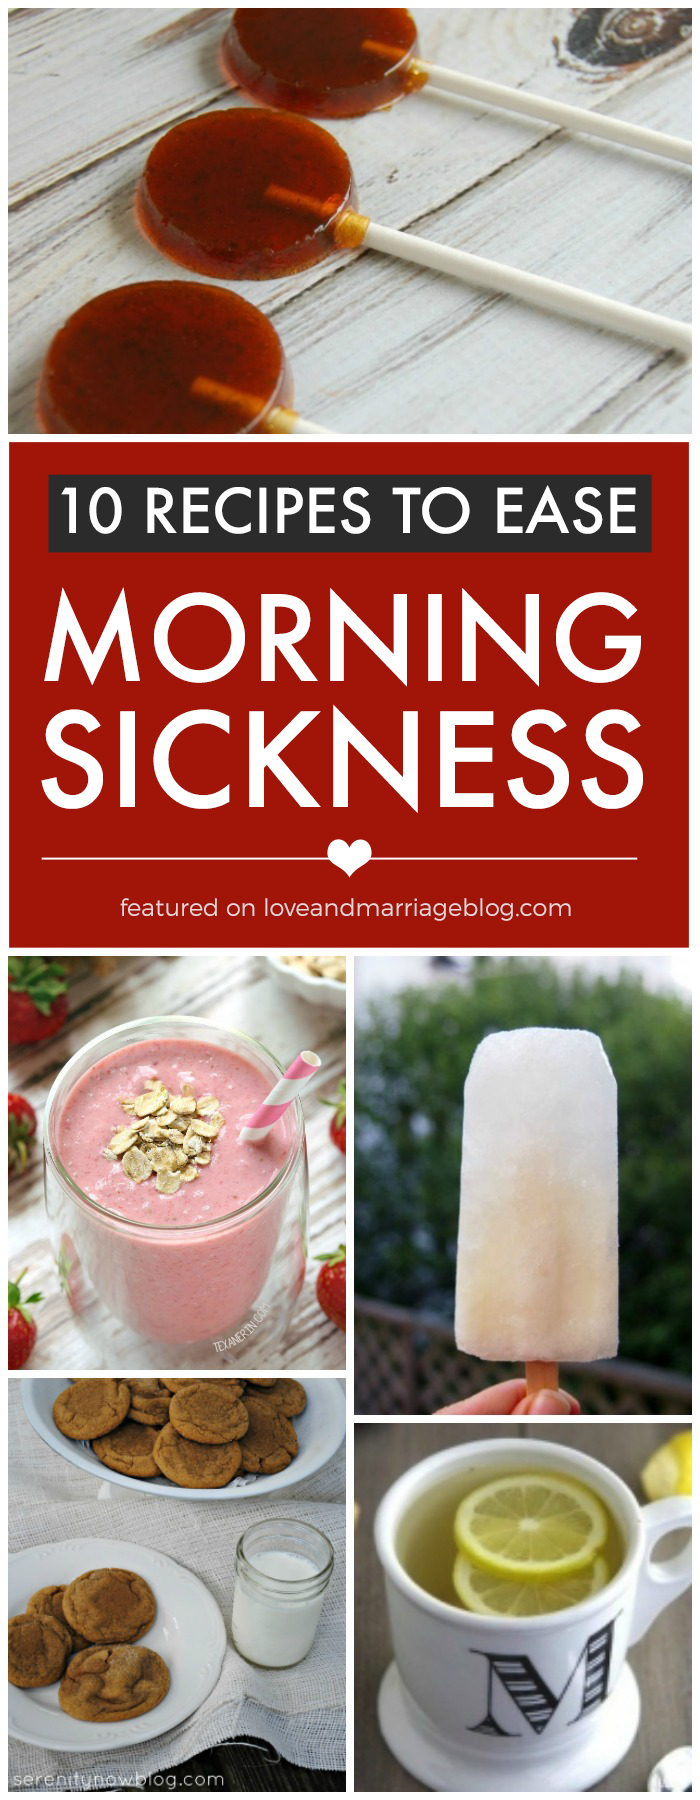 10 Recipes That Help Ease Morning Sickness